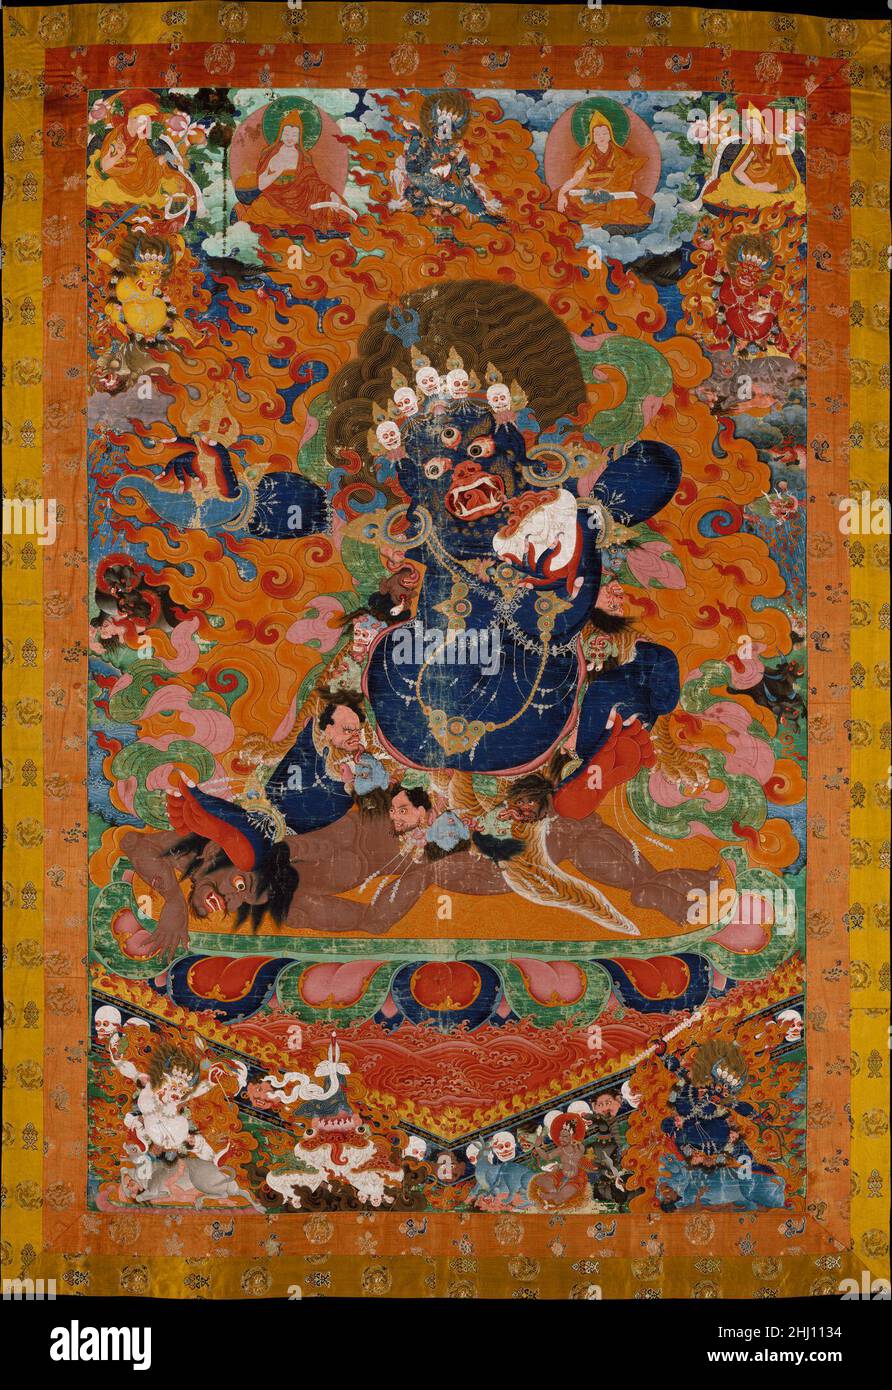 Yamantaka, Destroyer of the God of Death early 18th century Tibet This image of a wrathful protector of Buddhism would have been an awesome presence in the dimly lit interior of a Tibetan monastery. Yamantaka is a violent aspect of the Bodhisattva Manjushri, who assumes this form to vanquish Yama, the god of death. By defeating Yama, the cycle of rebirths (samsara) that prevents enlightenment is broken. Yamantaka, who shares many attributes with Mahakala, is identified by his blue skin and the array of attributes displayed here. He is encircled by five smaller manifestations, each a Yama-conqu Stock Photo